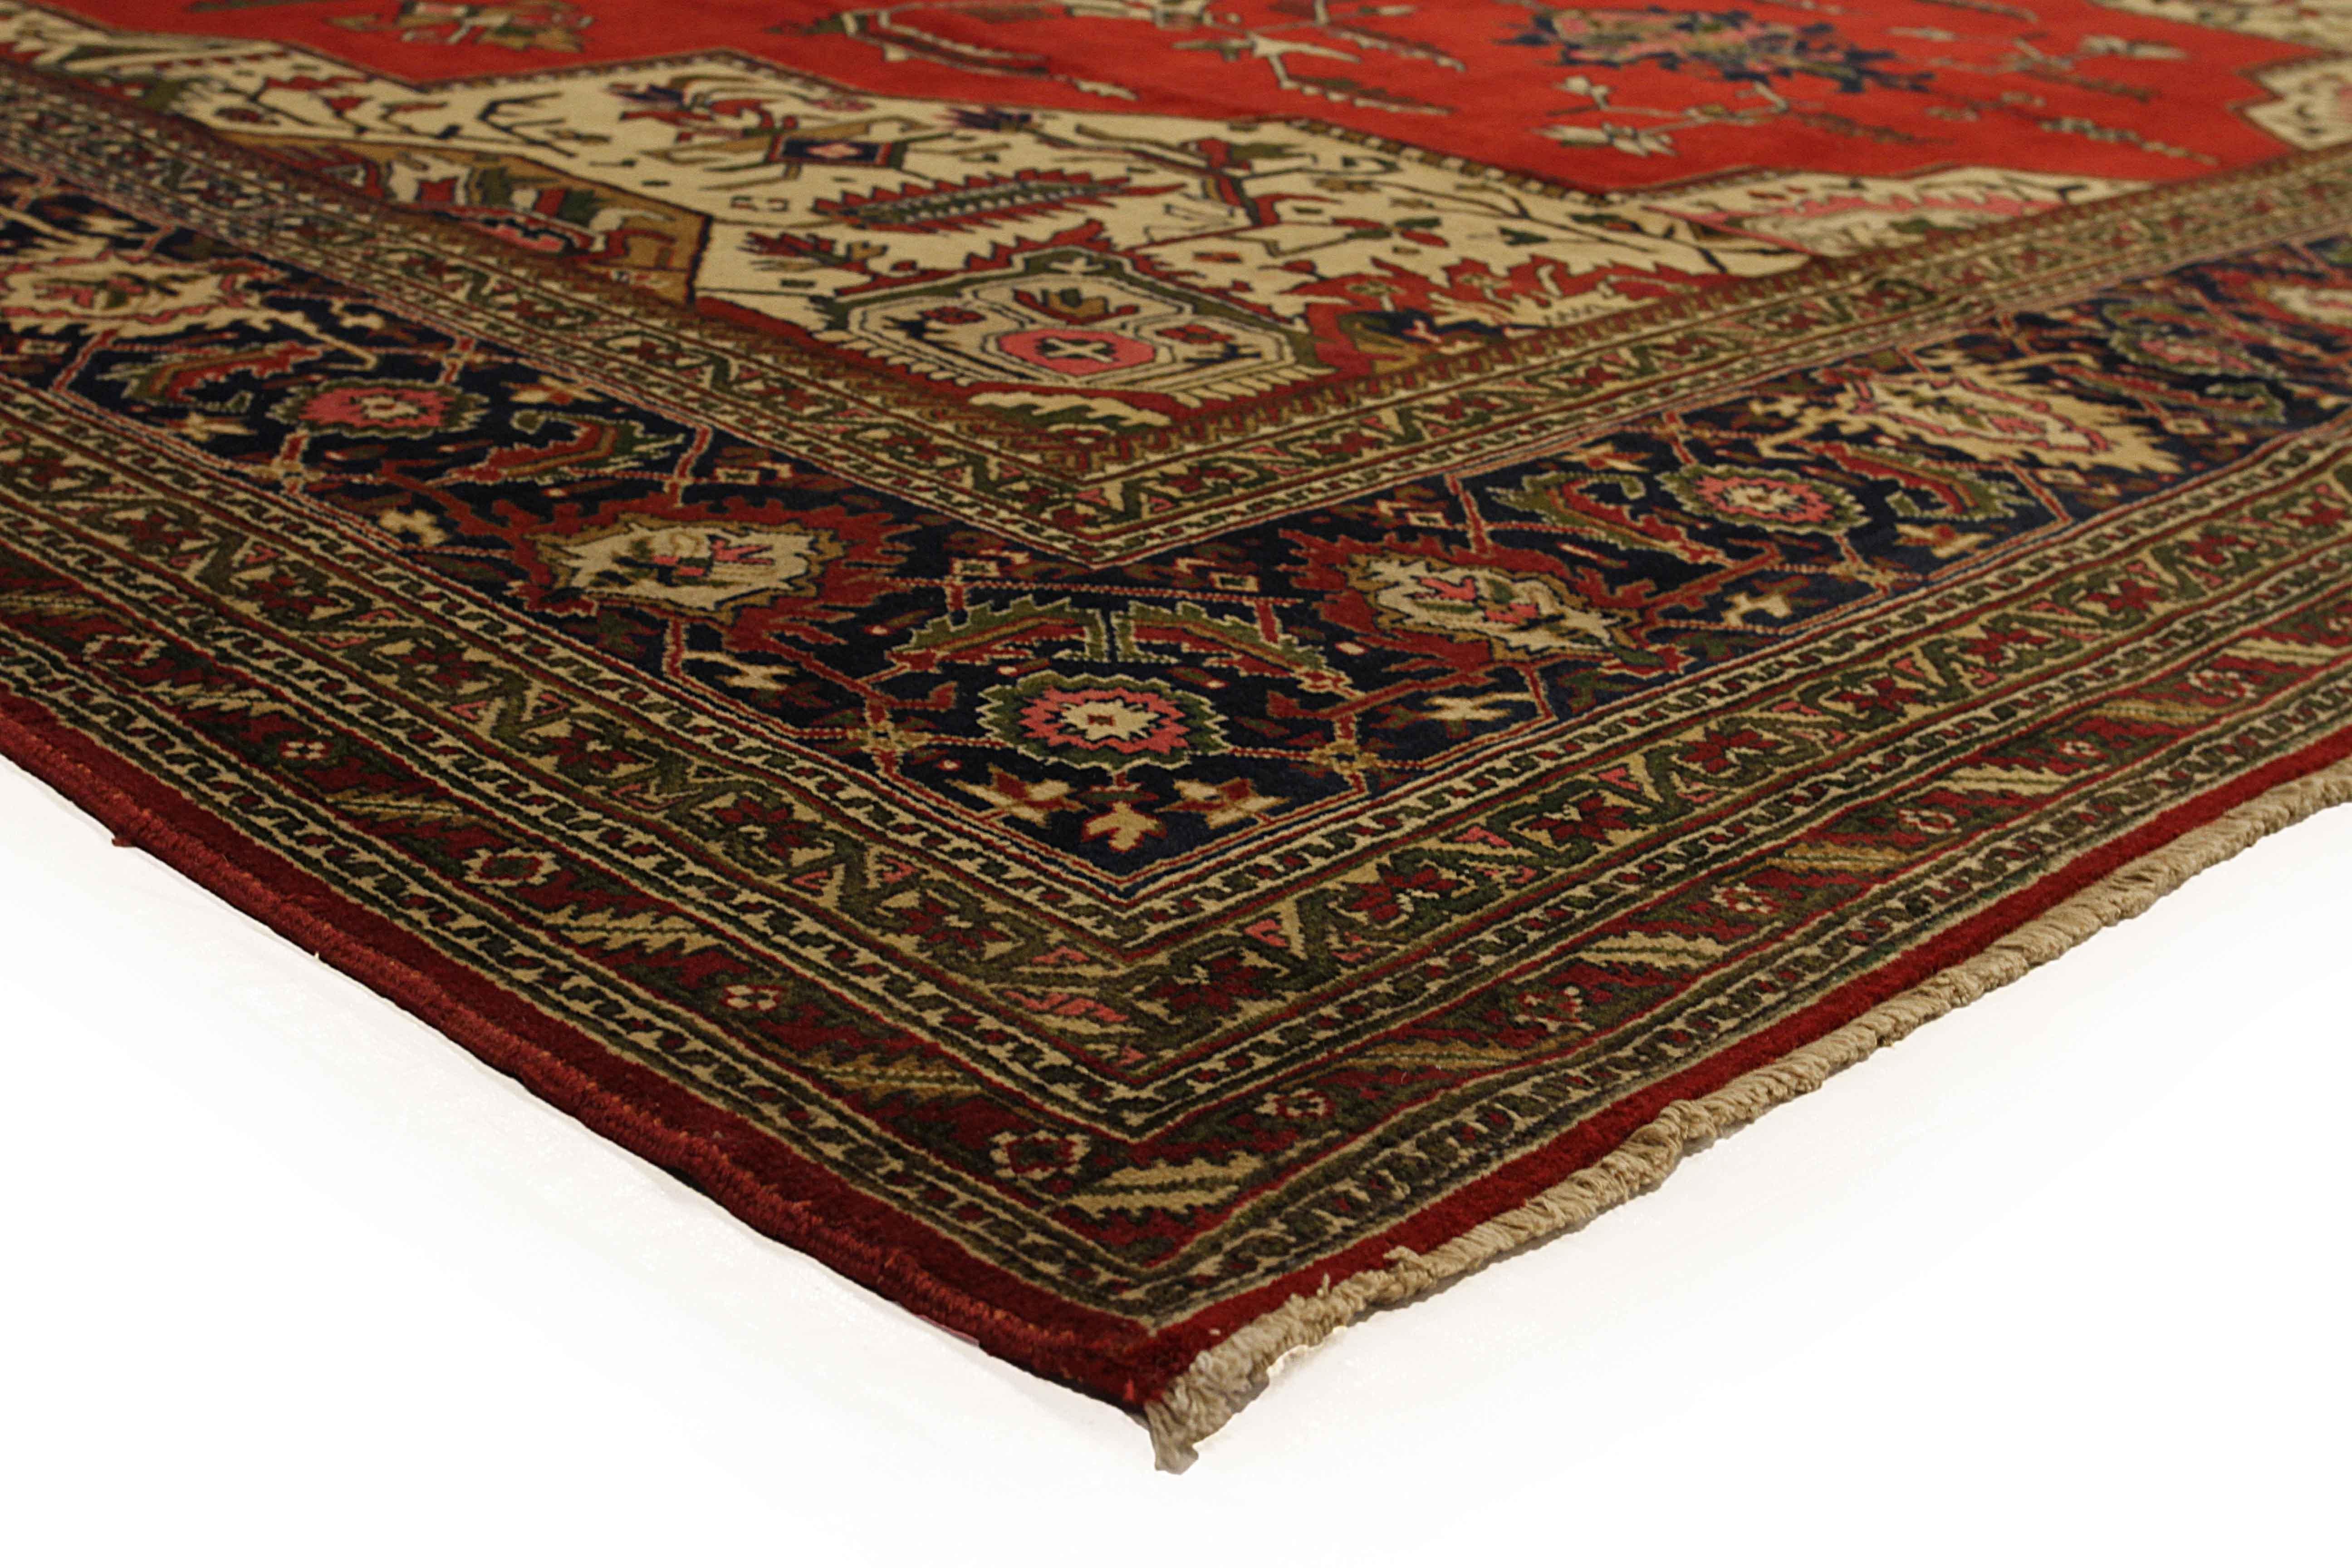 Wool Mid-20th Century Hand-Woven Persian Rug Tabriz Design For Sale